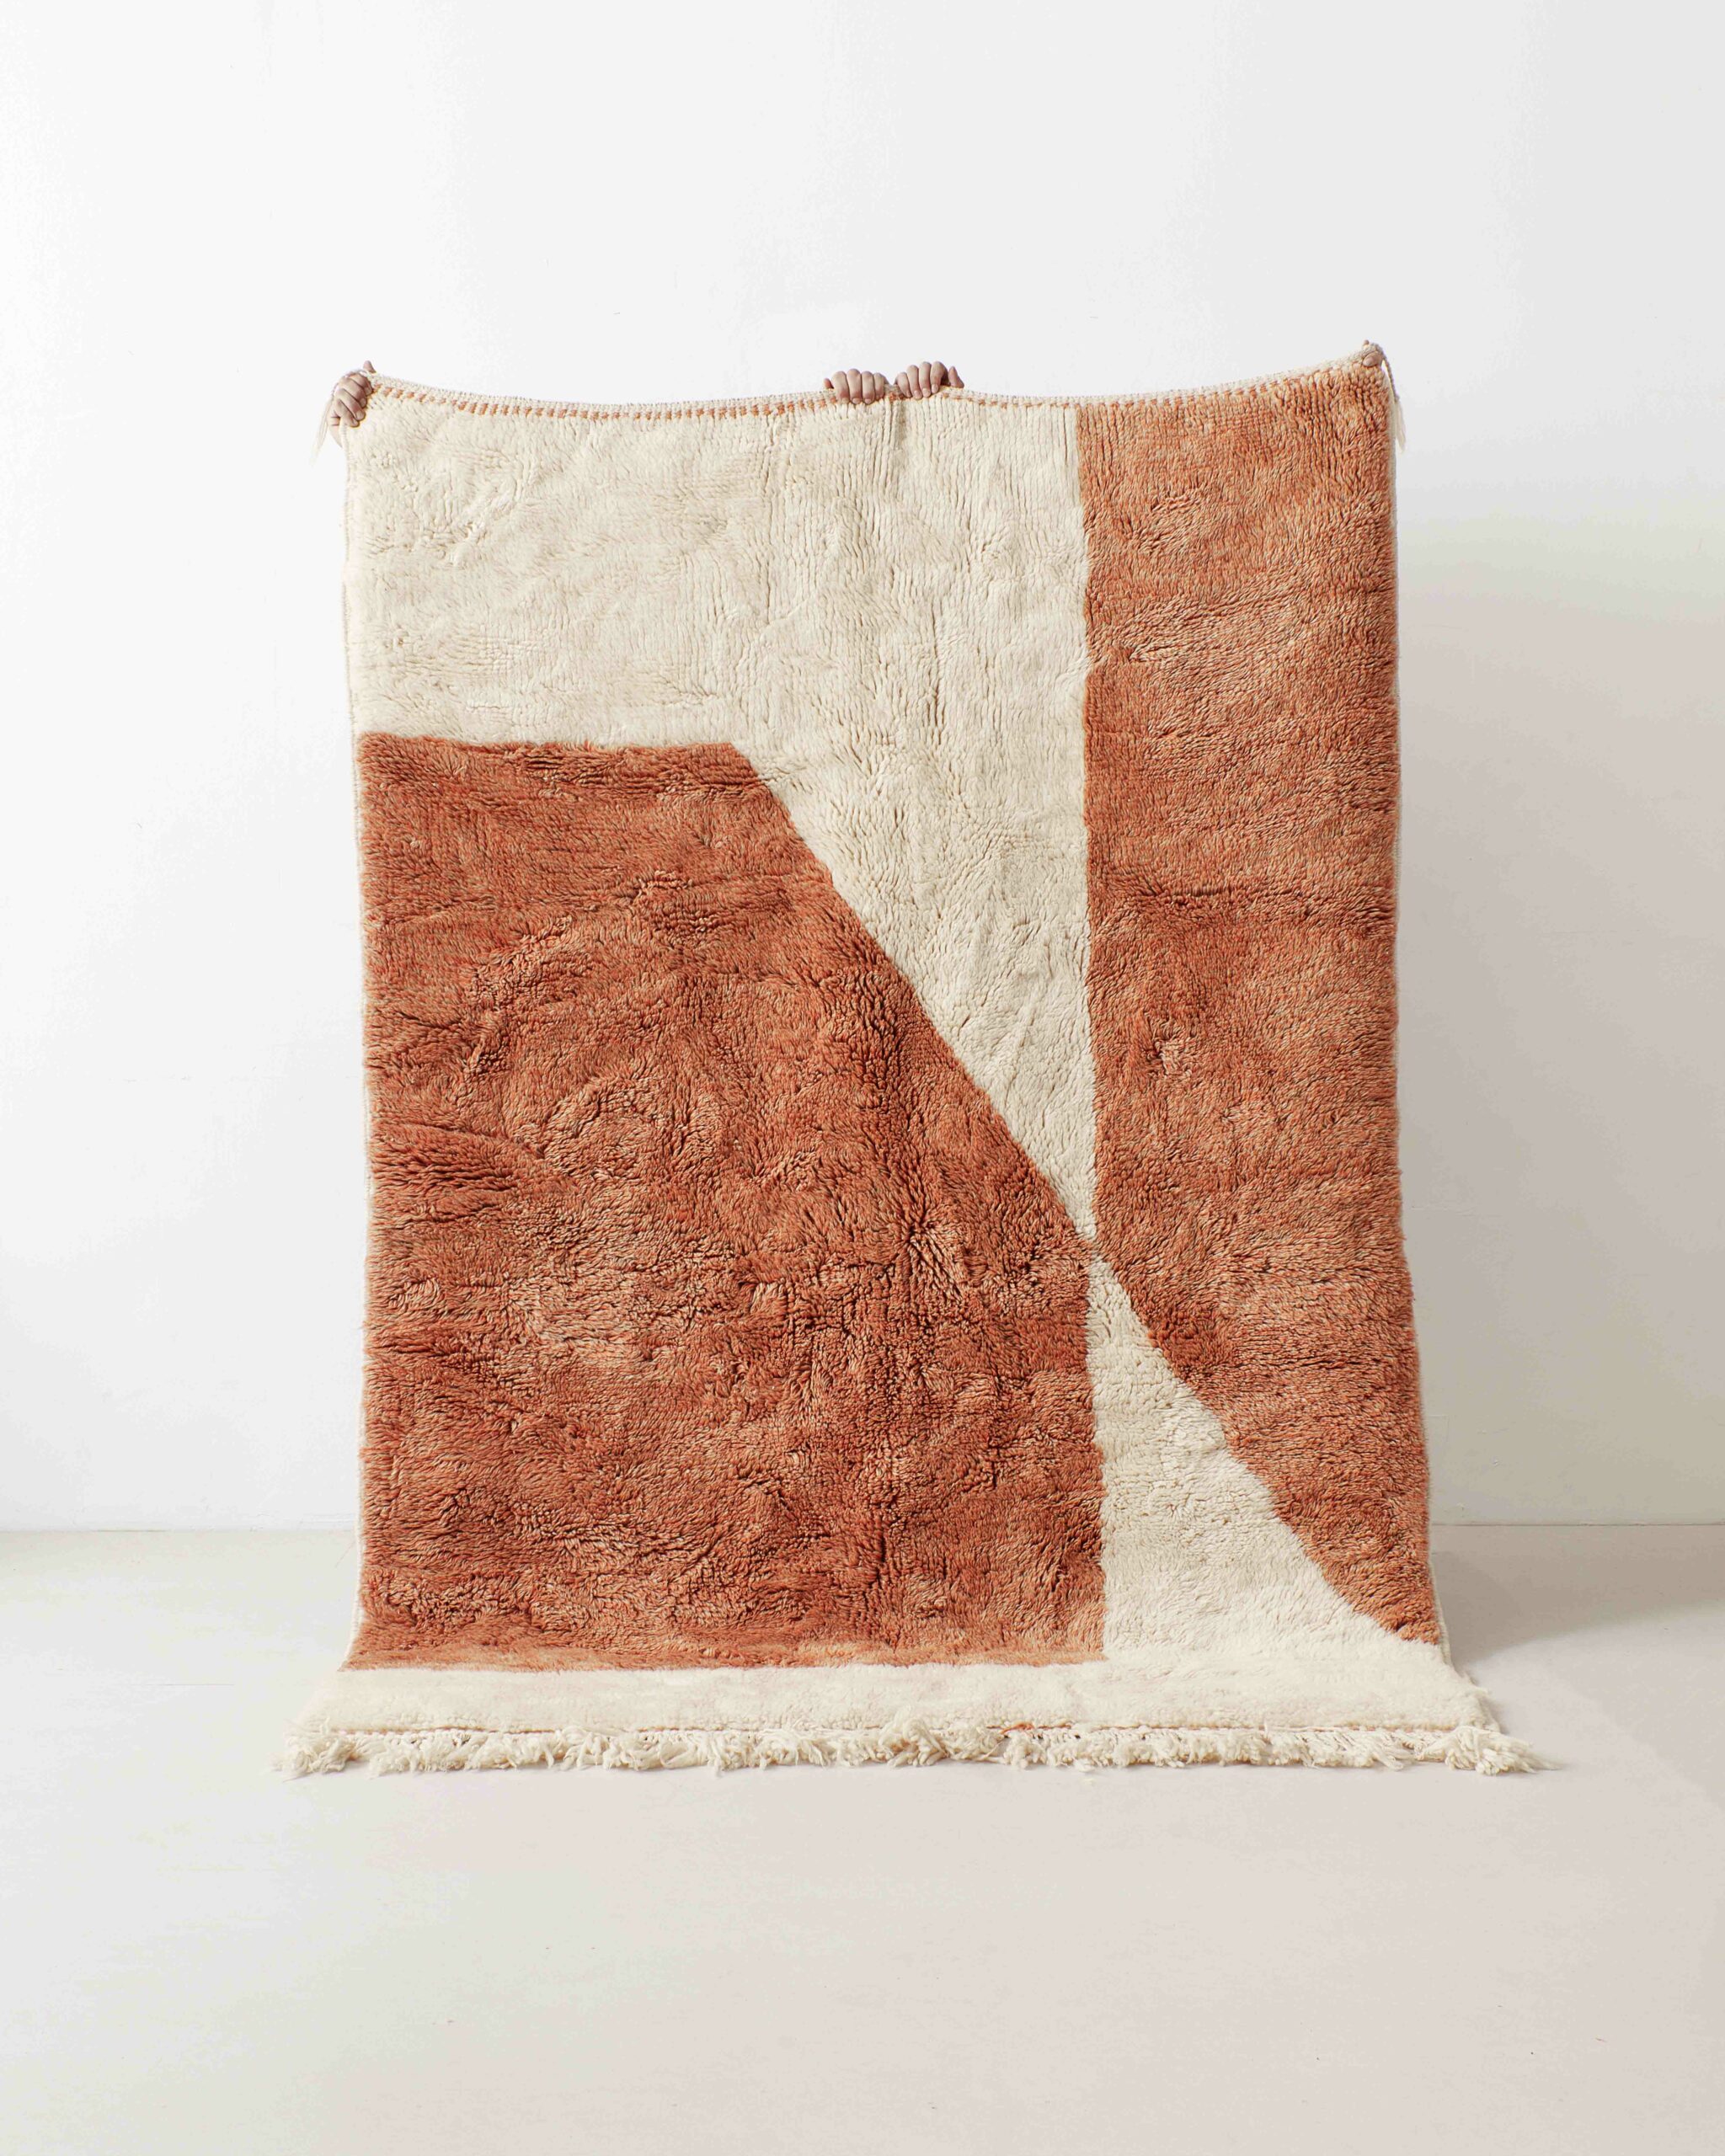 Mrirt rug with rusty shades, upside down